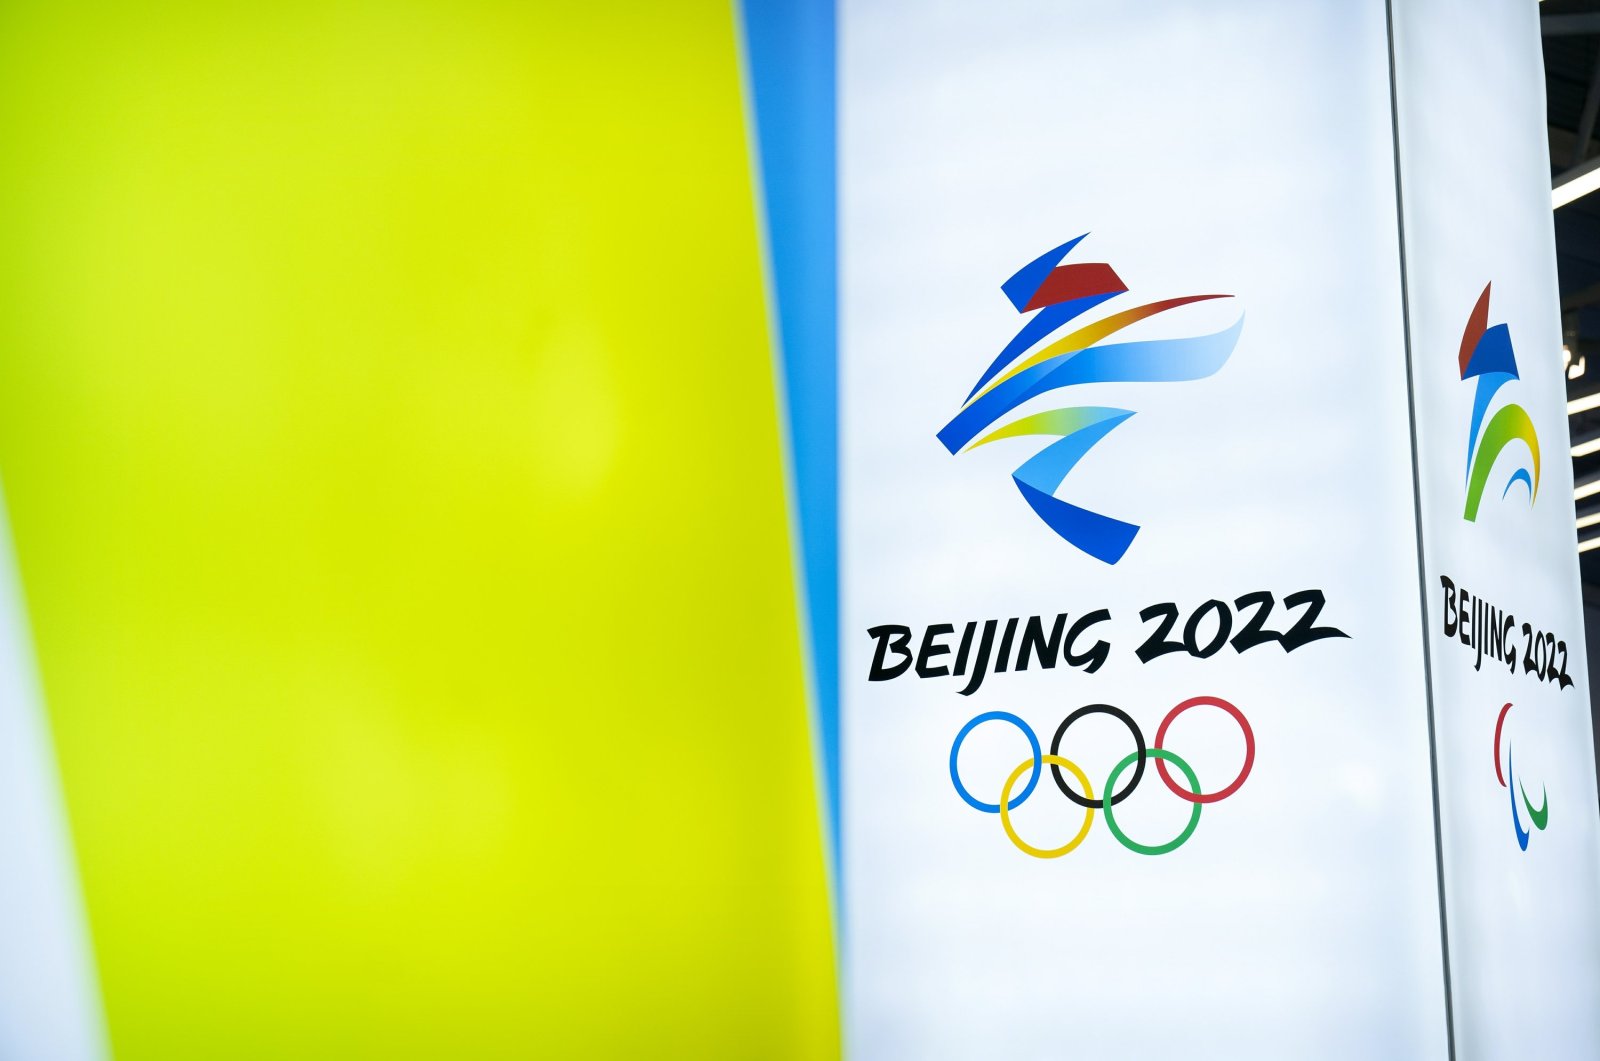 Beijing 2022 Winter Olympics logo is on display at  a visitors center at the Winter Olympic venues in Yanqing on the outskirts of Beijing, China, Feb. 5, 2021. (AP Photo)